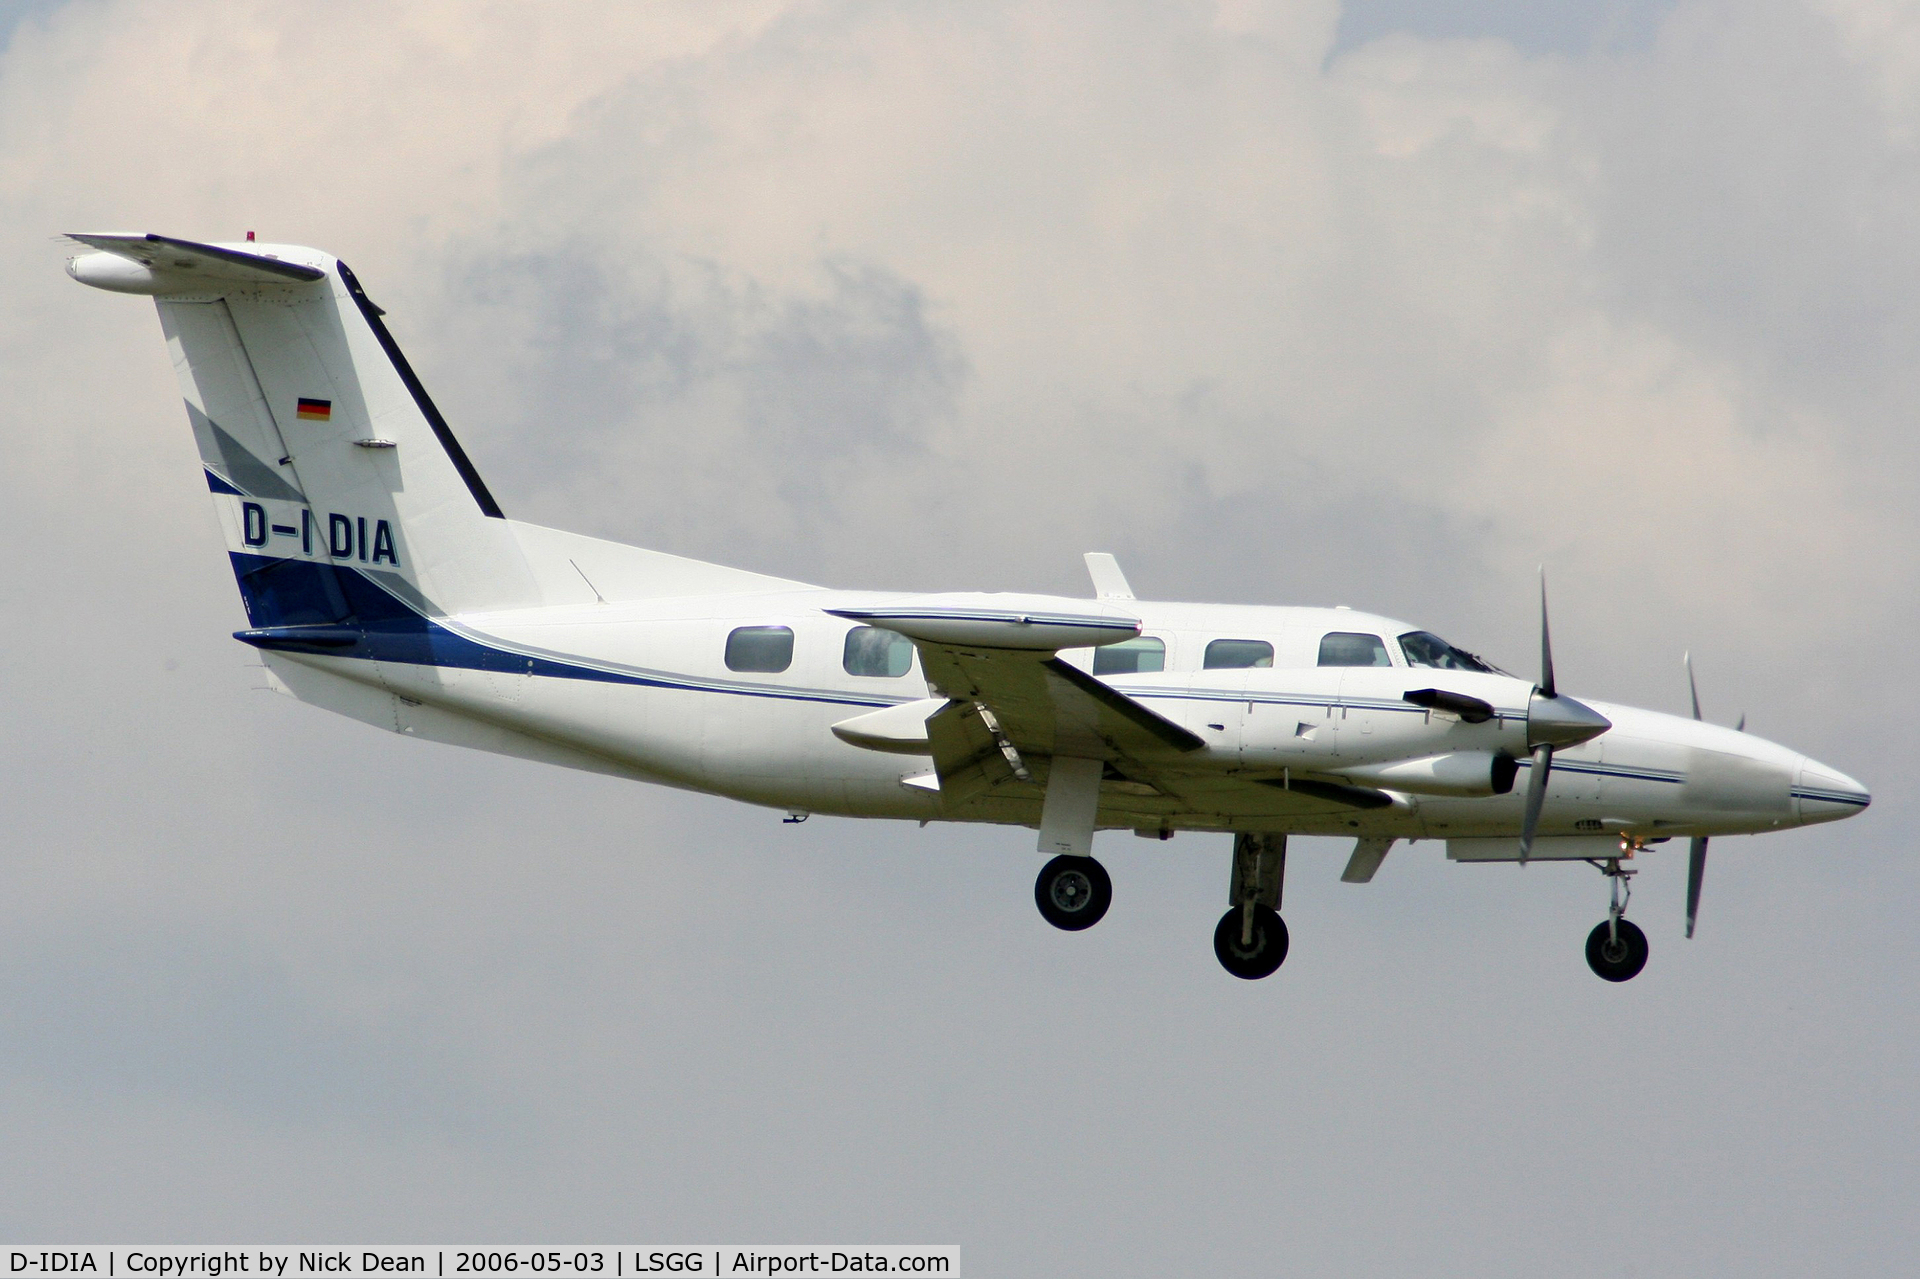 D-IDIA, 1990 Piper PA-42-720 Cheyenne IIIA C/N 42-5501055, LSGG W/O 19th Jan 2009 crashed and destroyed while on a flight from Frankfurt to Bad Nauheim